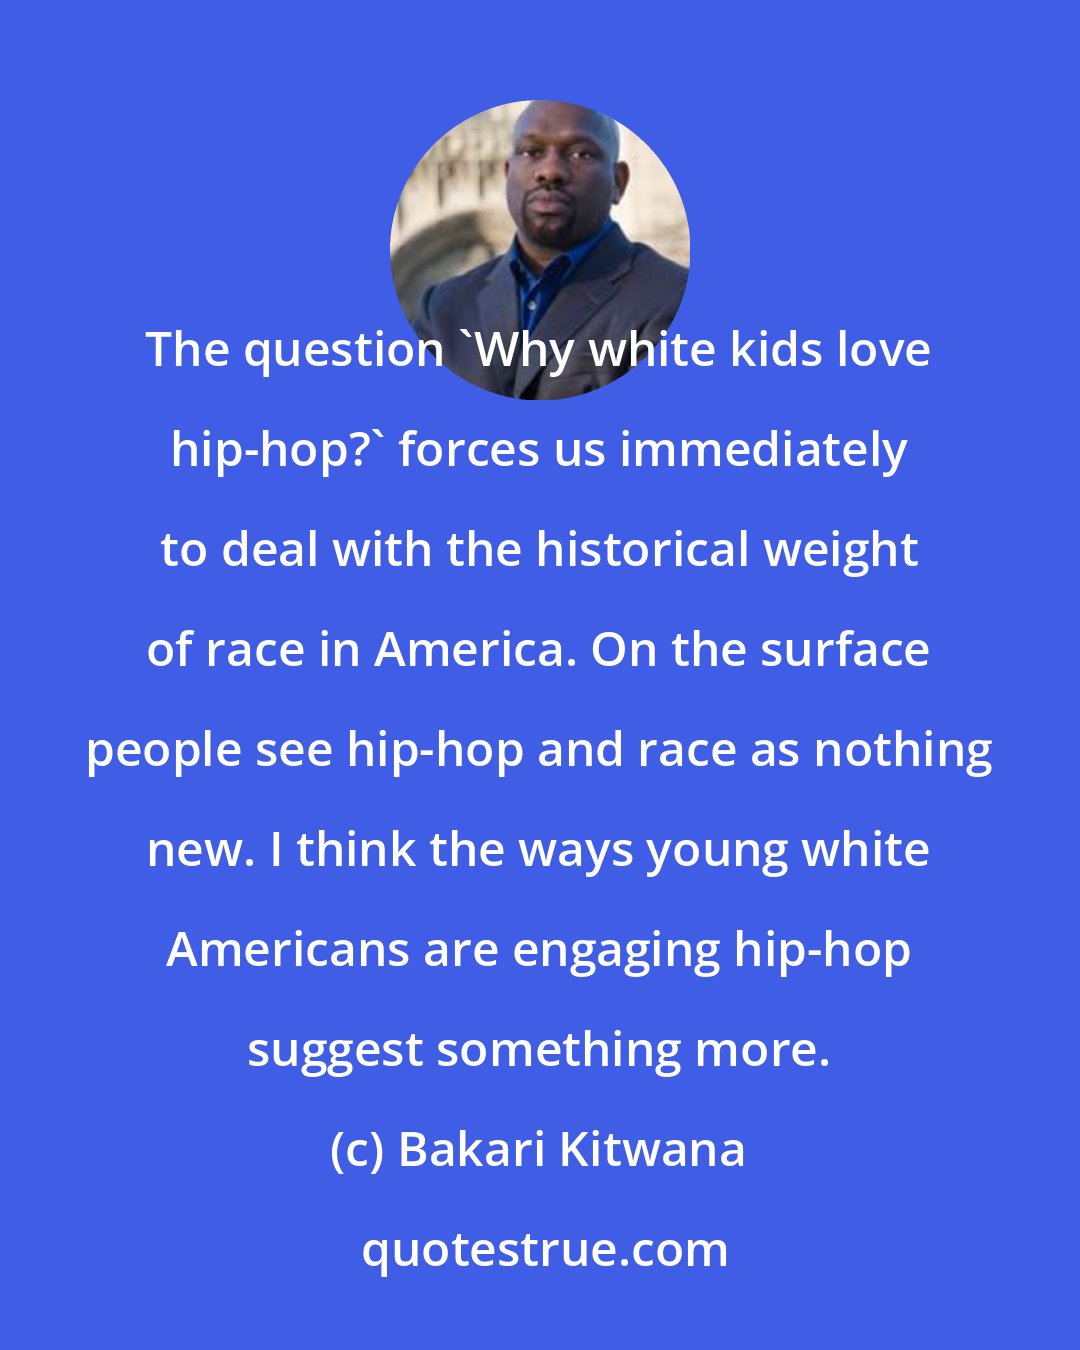 Bakari Kitwana: The question 'Why white kids love hip-hop?' forces us immediately to deal with the historical weight of race in America. On the surface people see hip-hop and race as nothing new. I think the ways young white Americans are engaging hip-hop suggest something more.